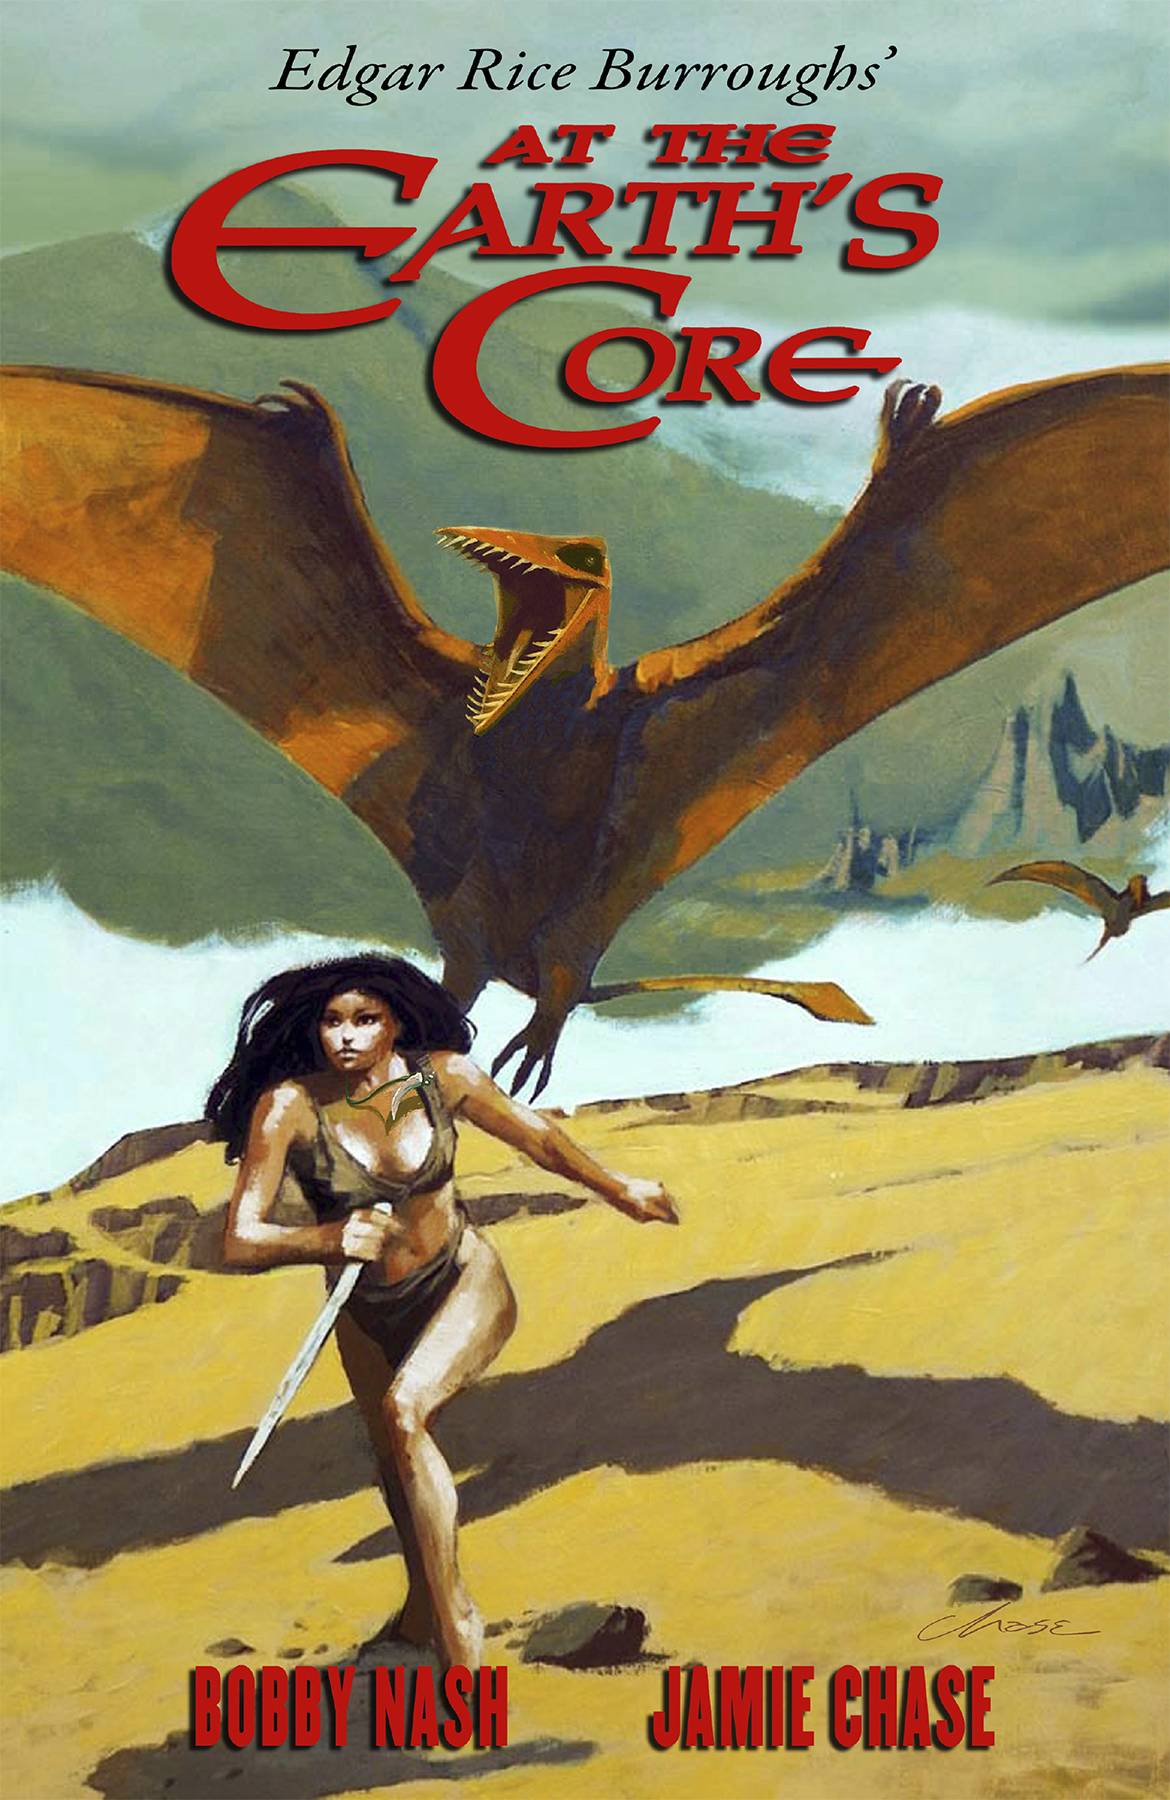 Edgar Rice Burroughs At The Earths Core Hardcover